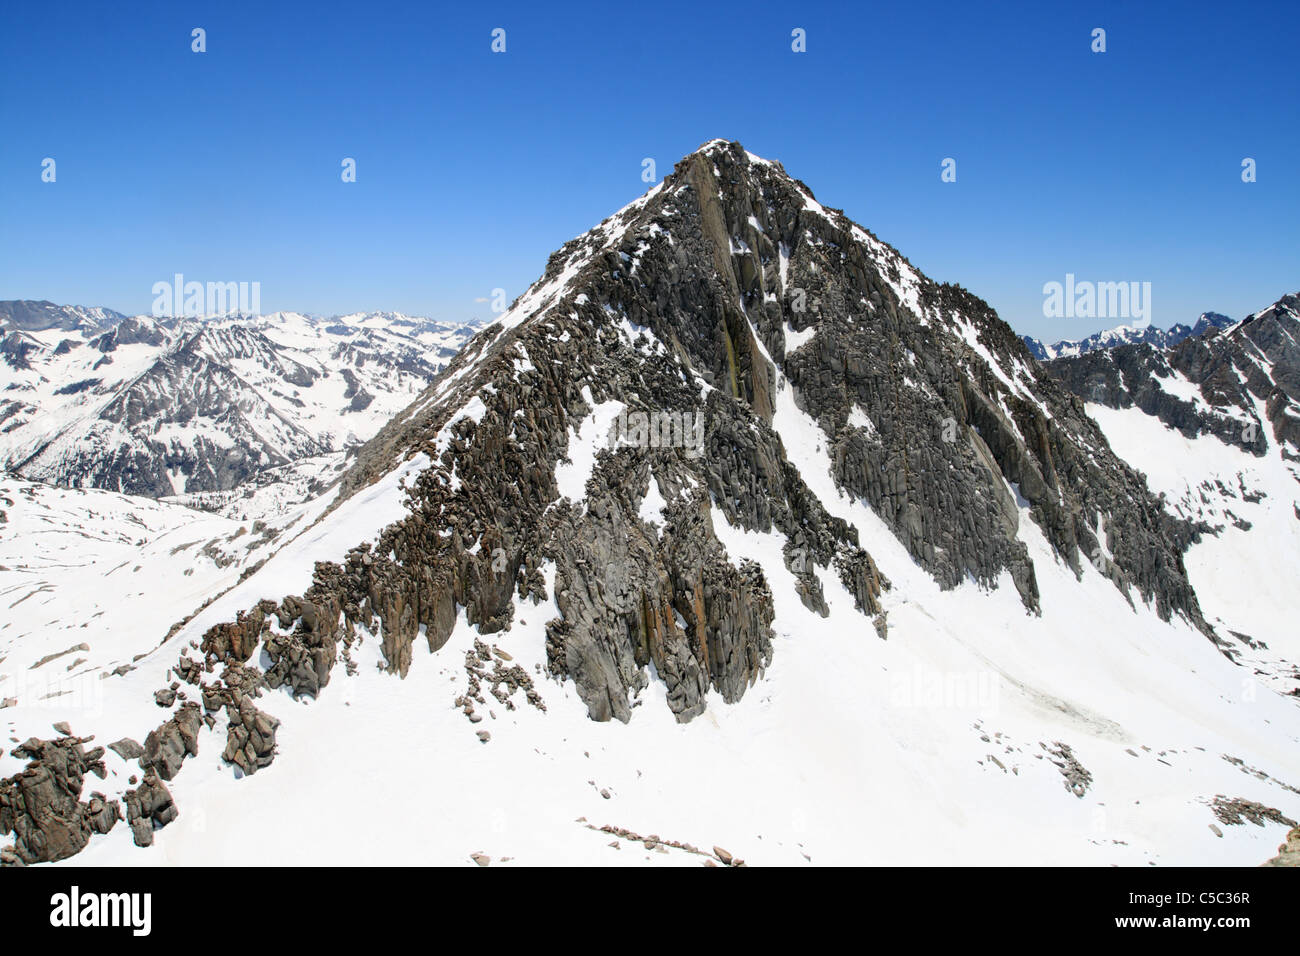 Columbine Peak in the Sierra Nevada viewed from Isosceles Peak in snowy early summer conditions Stock Photo